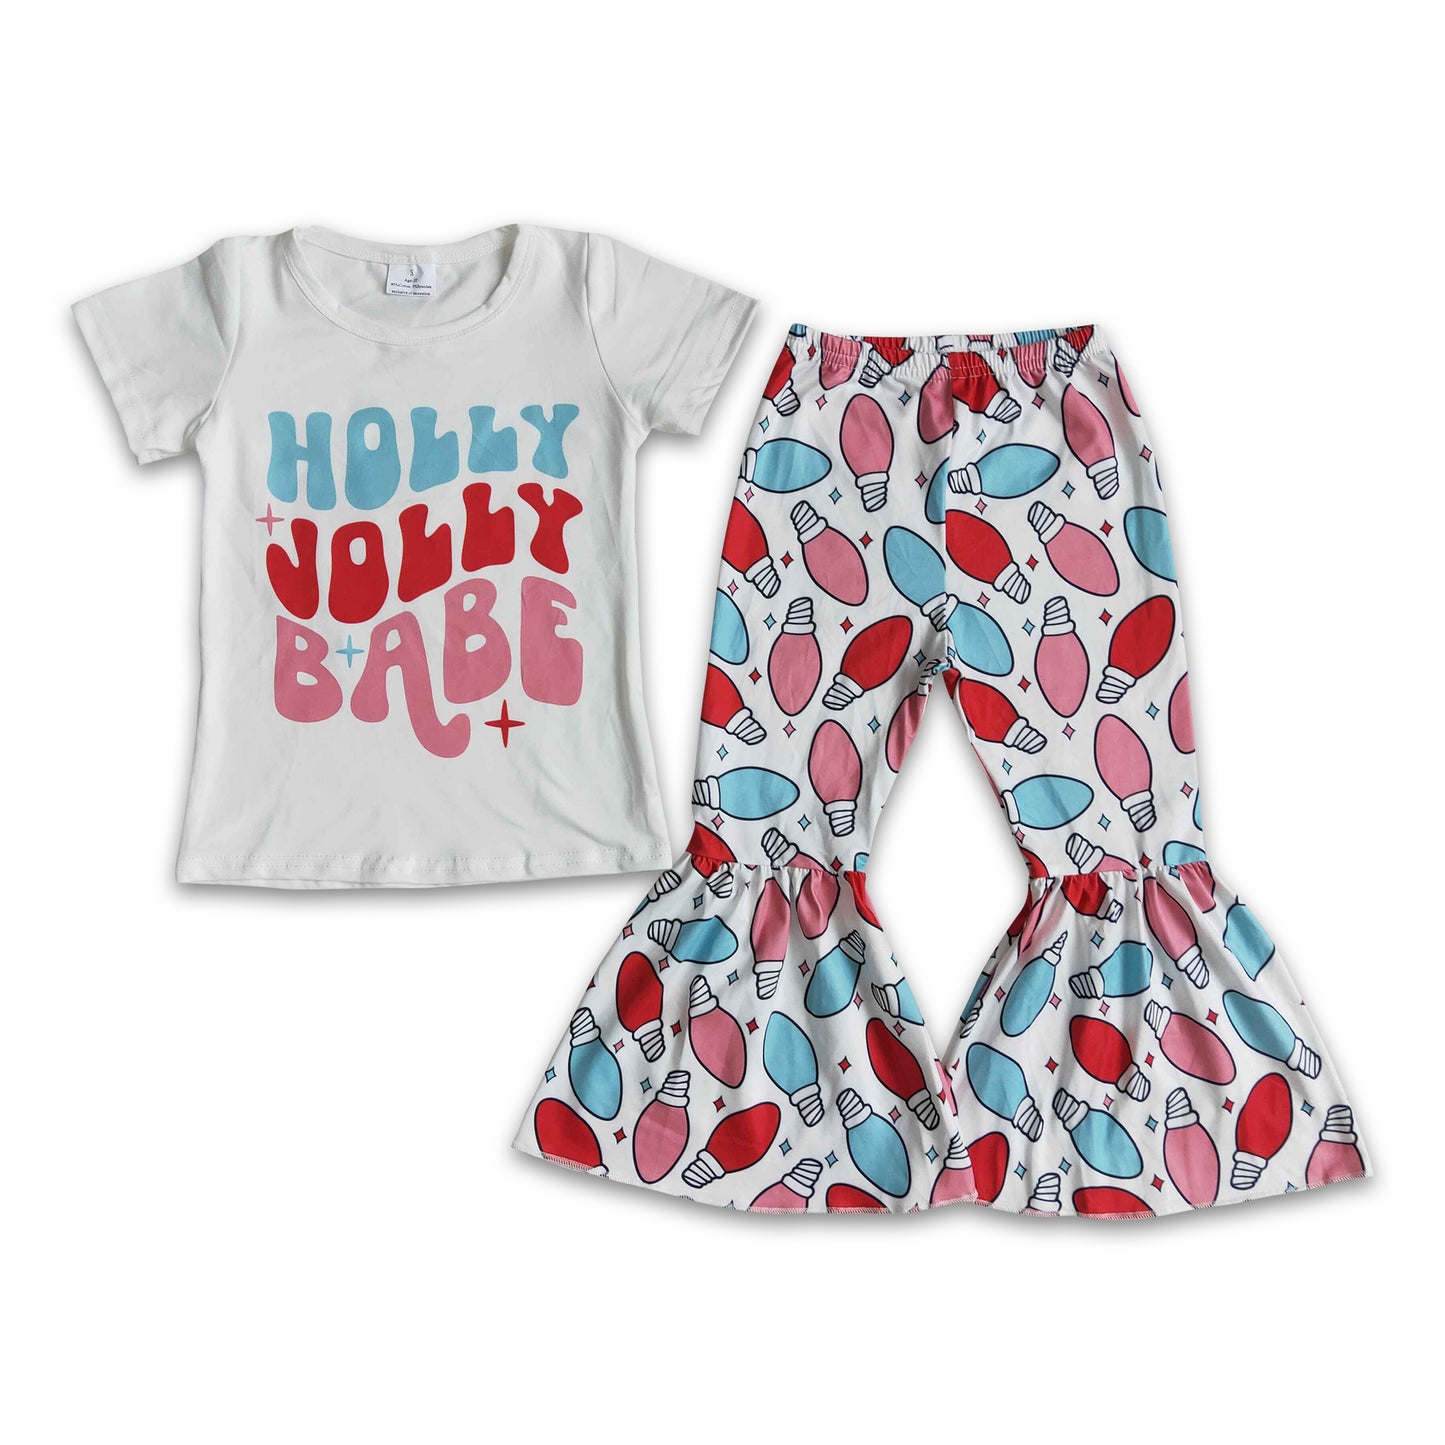 Holly jolly babe shirt bell bottom pants girls Christmas clothes